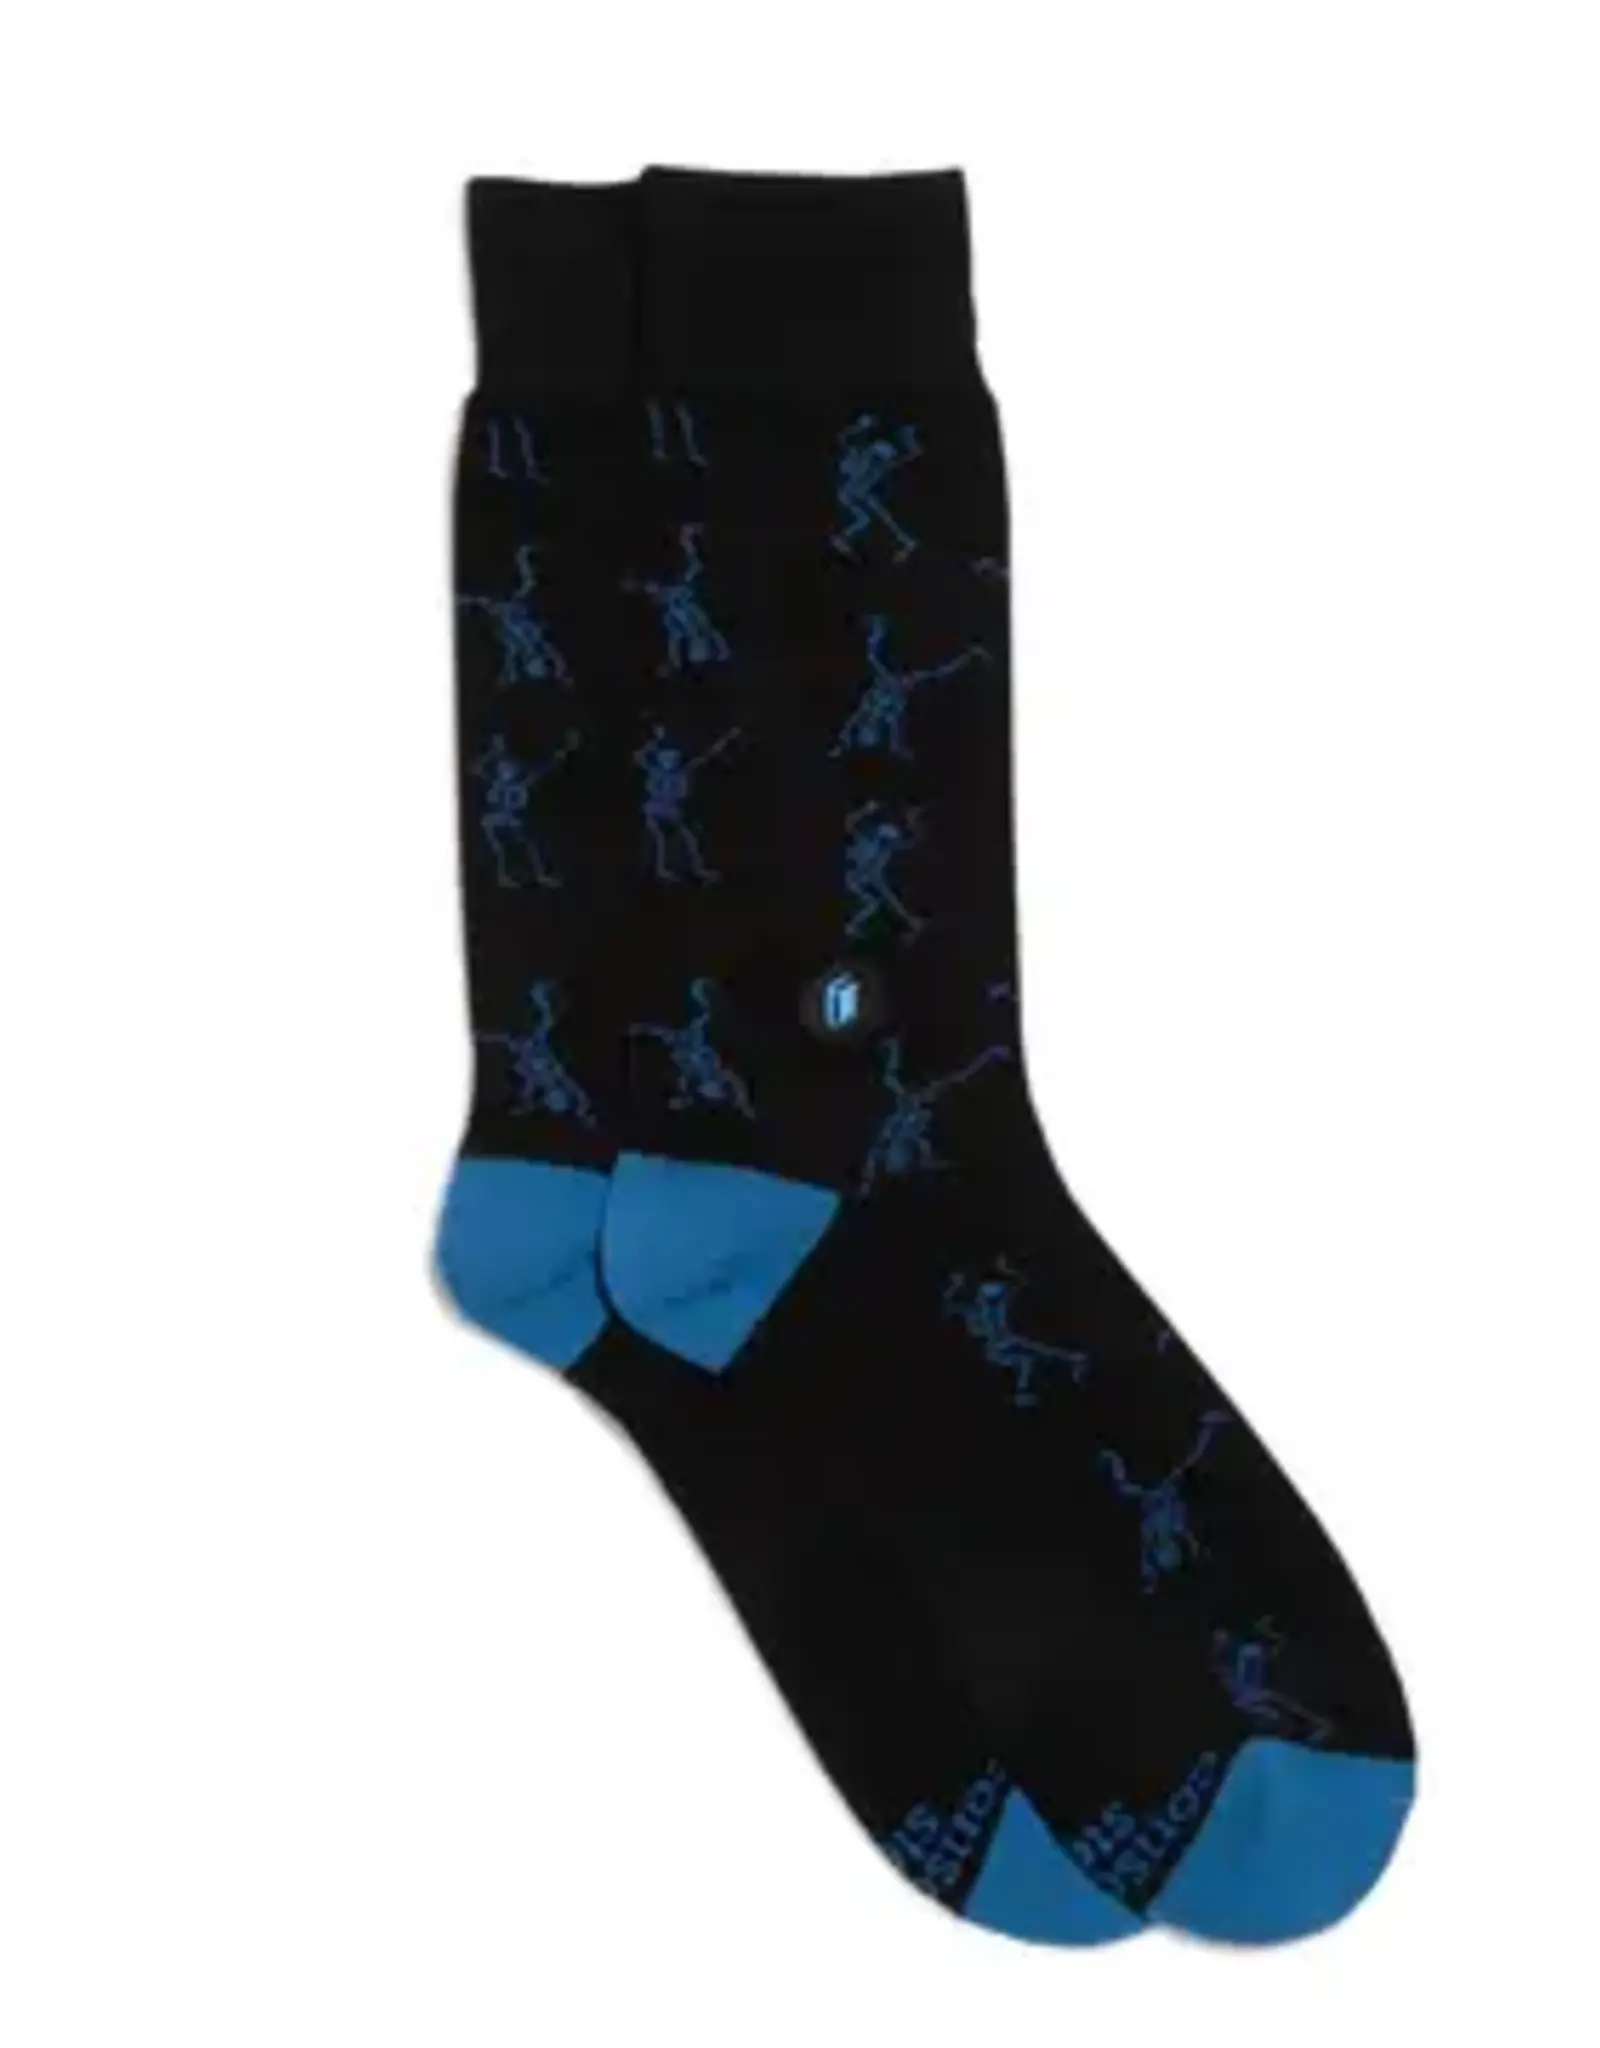 India Socks That Give Books Skeletons S - India